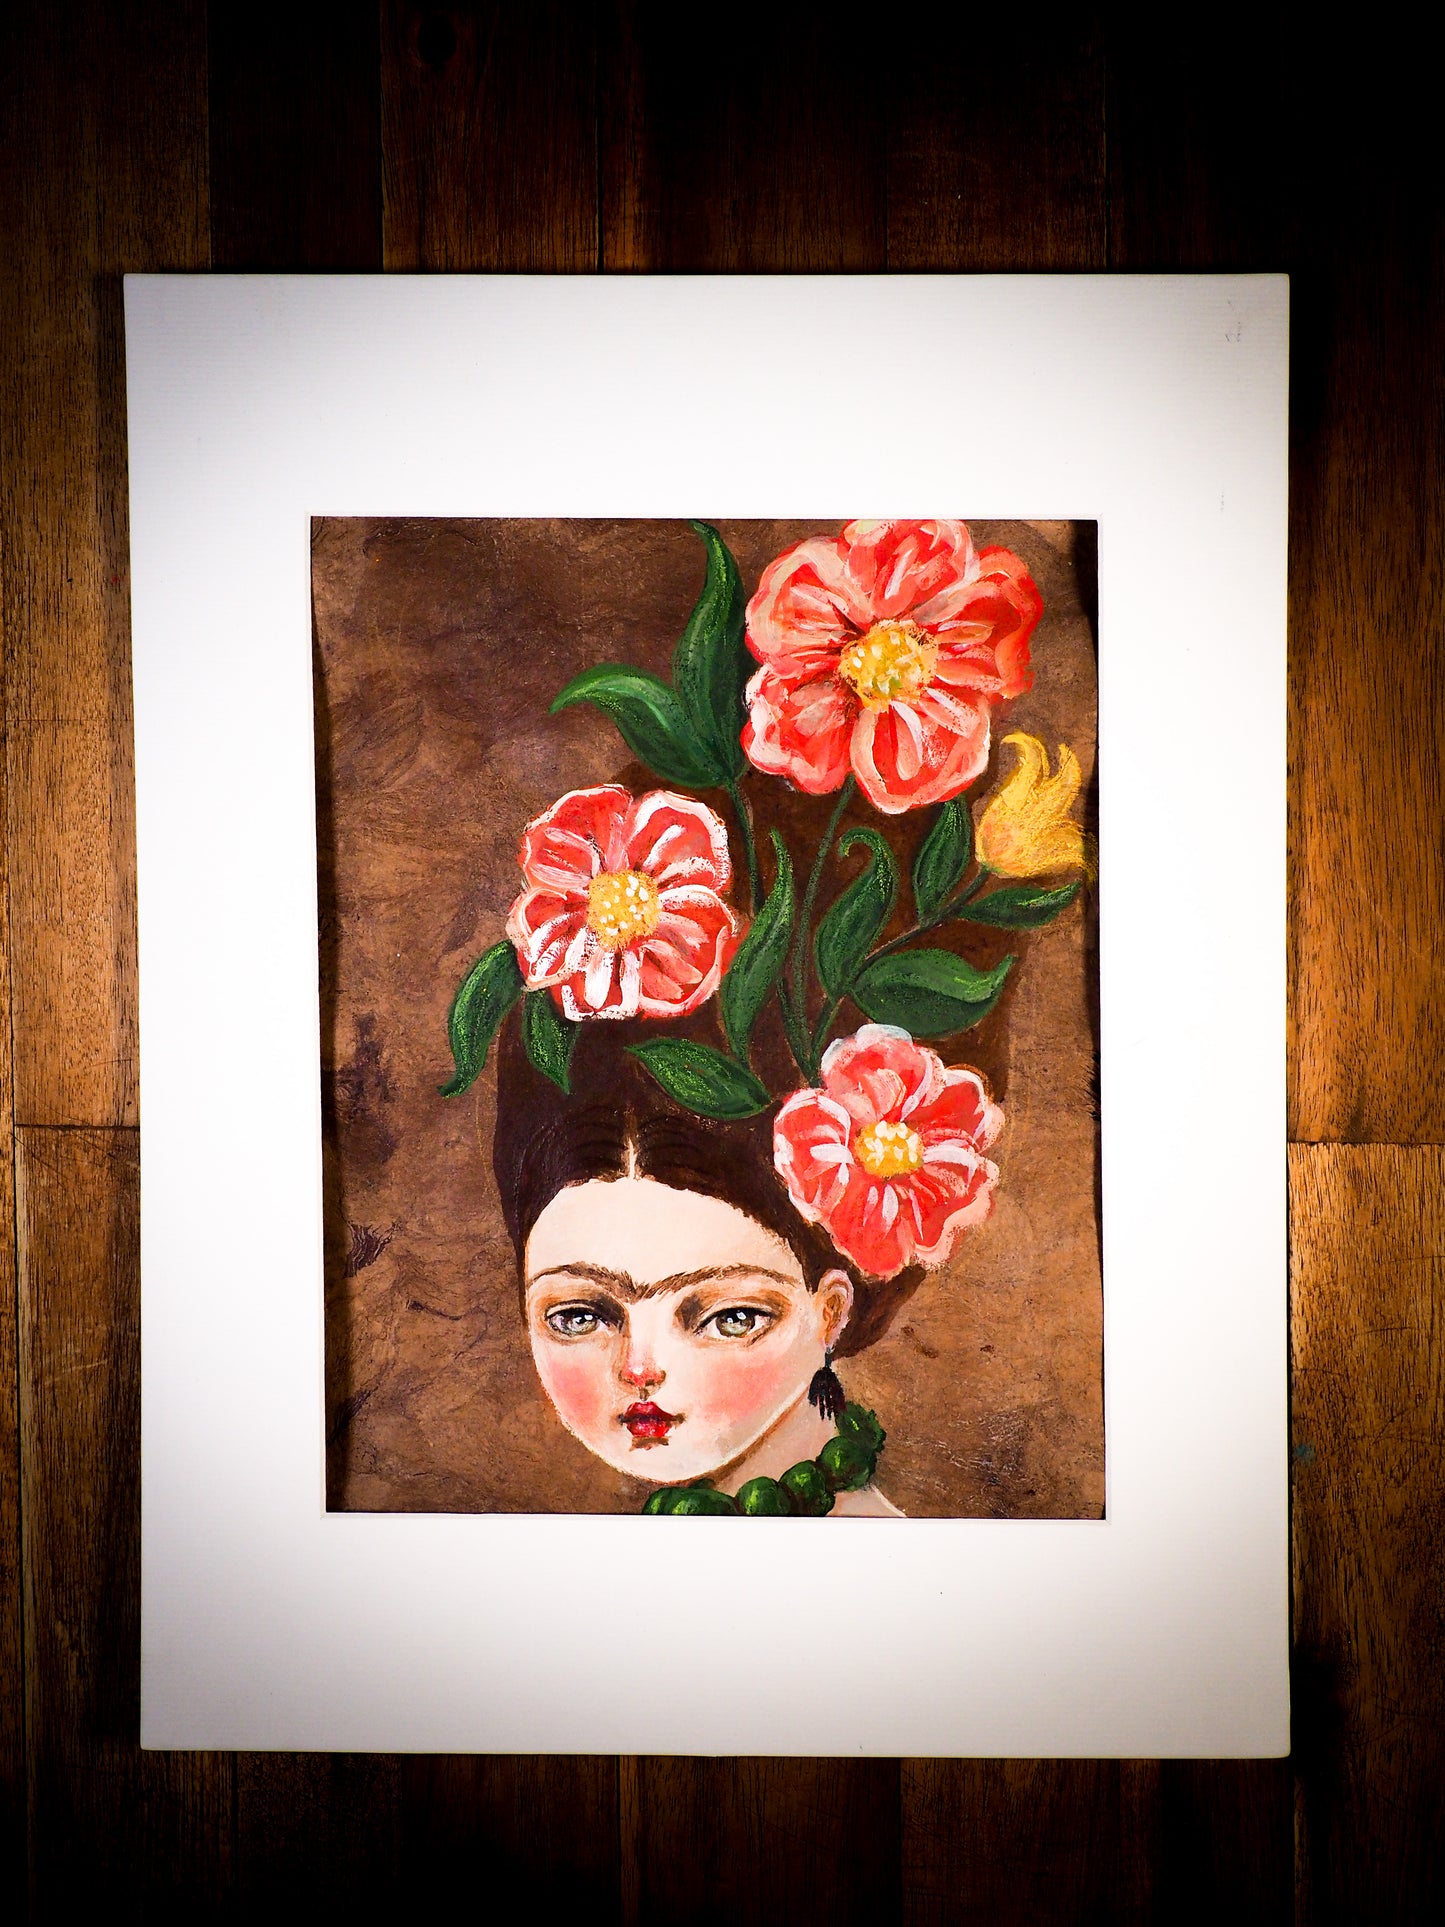 An original watercolor painting by Idania Salcido, the artist behind Danita Art.  This is a beautiful mixed media painting, Frida Khalo wearing a high hairdo with beautiful hand painted red flowers in her hair. Painted in mixed media, acrylics, inks and pastels on special handmade paper.